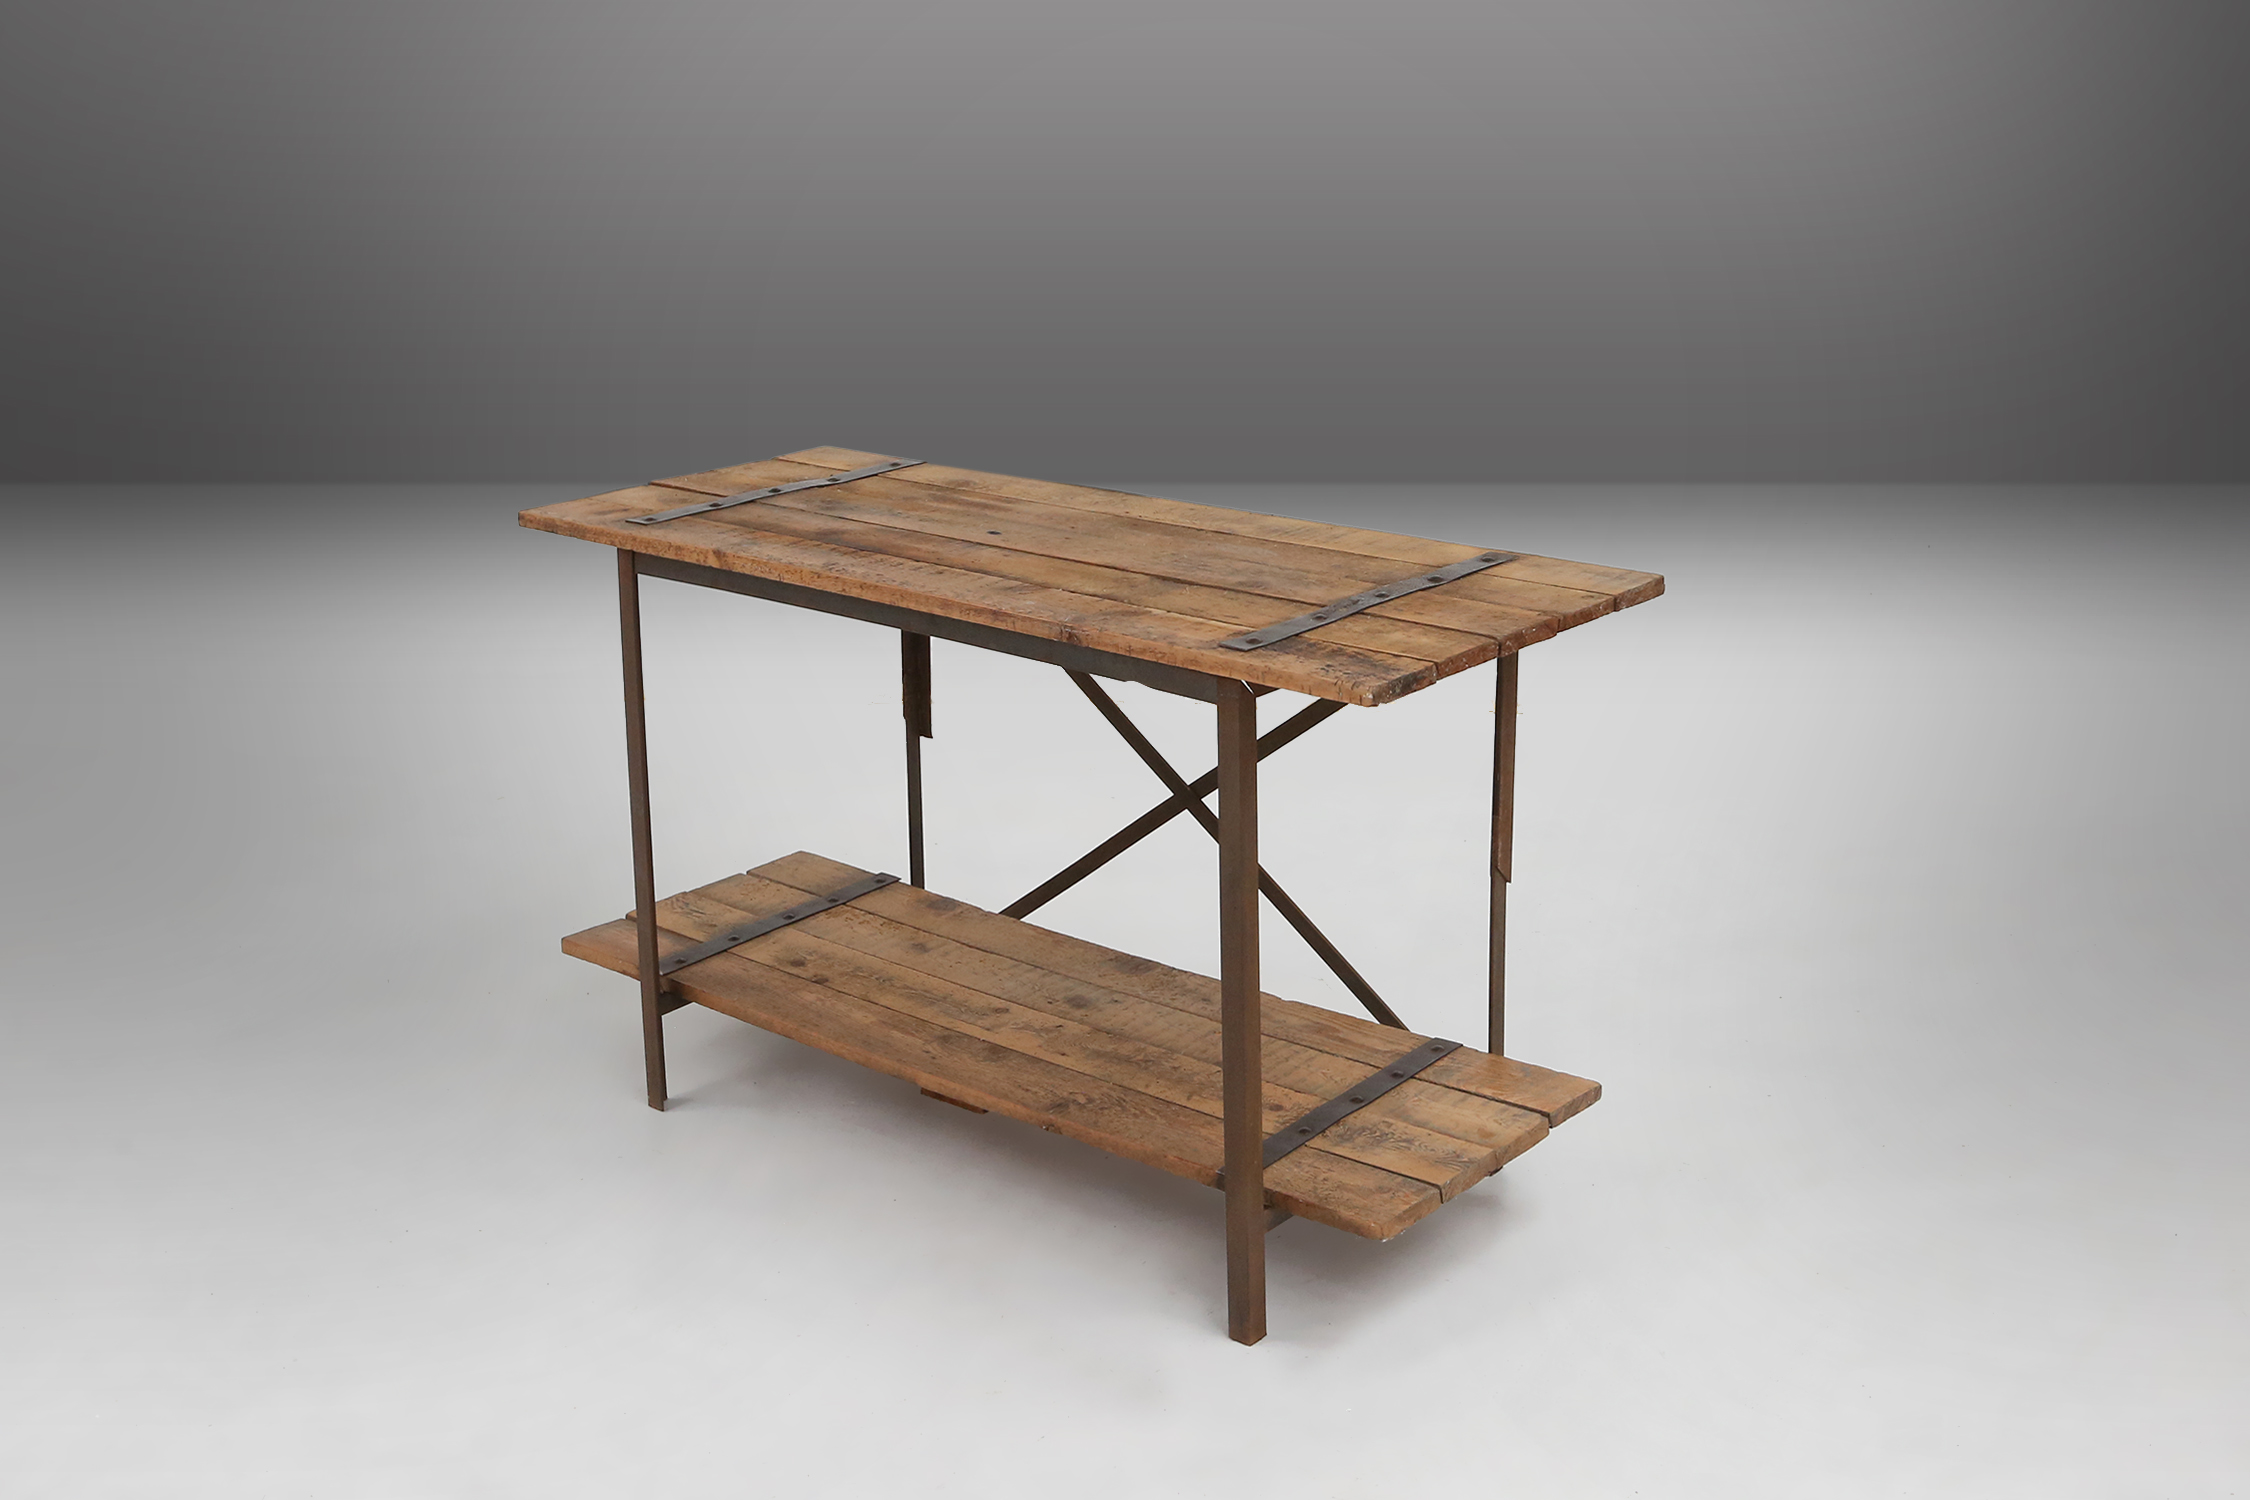  Industrial side tables with metal frame and wooden top and removable platform, Belgium, 1920thumbnail